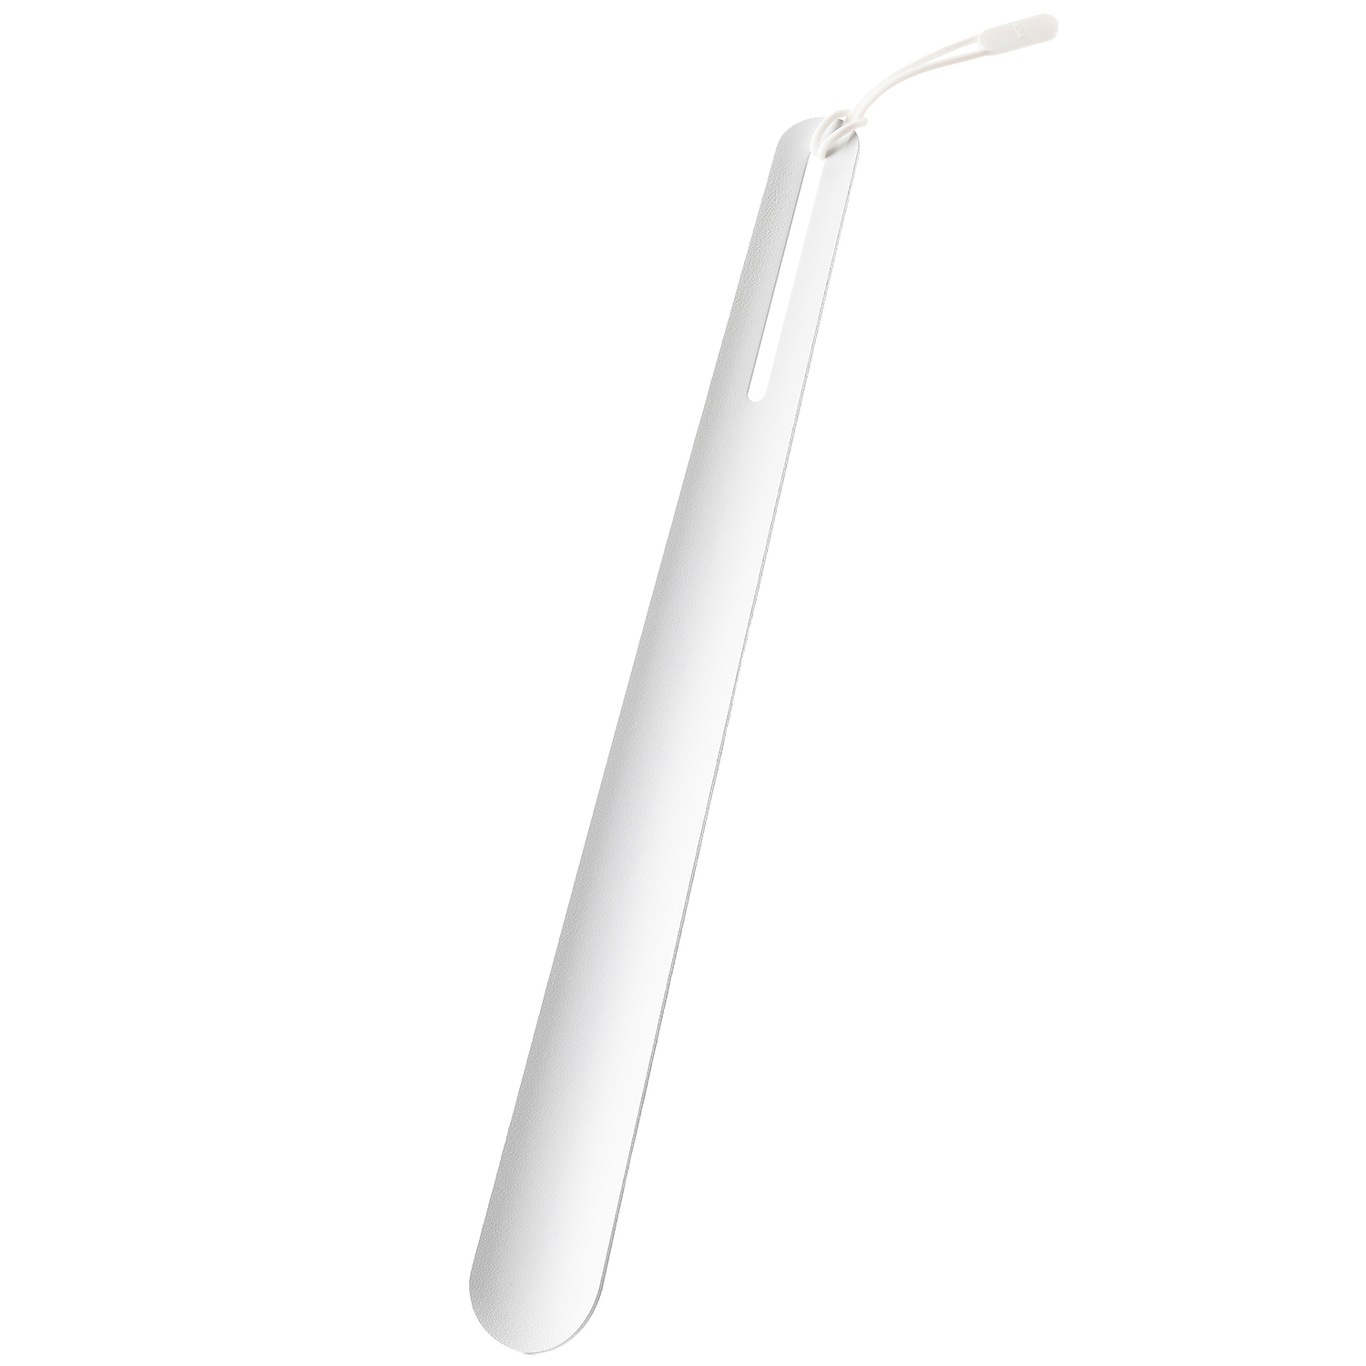 A-Shoehorn Shoehorn 45cm, White